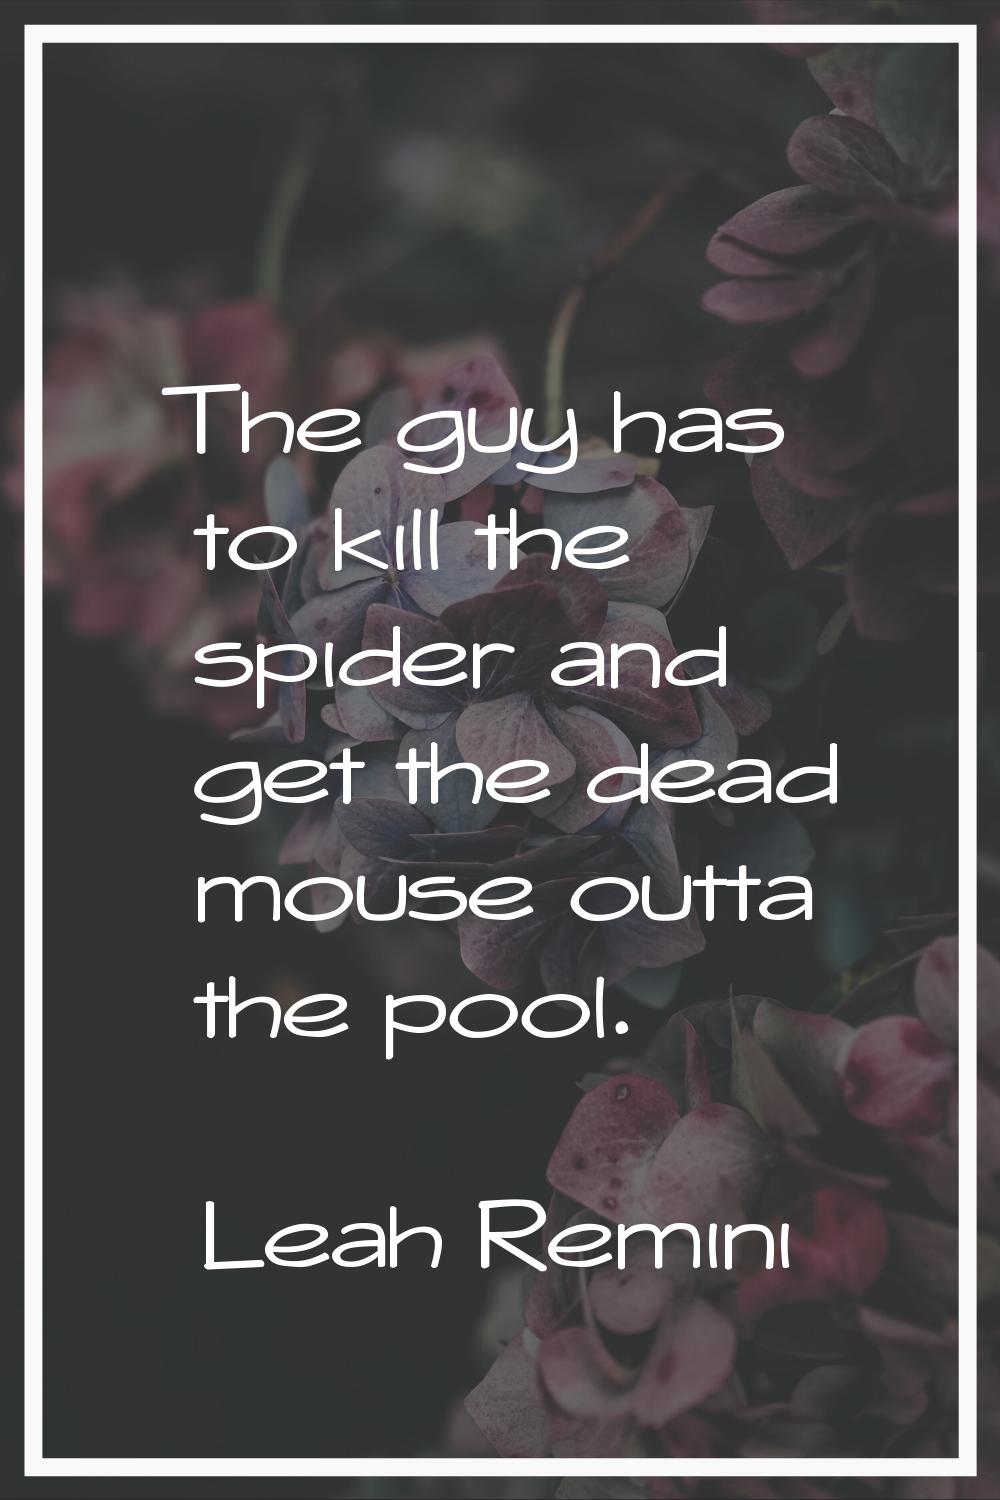 The guy has to kill the spider and get the dead mouse outta the pool.